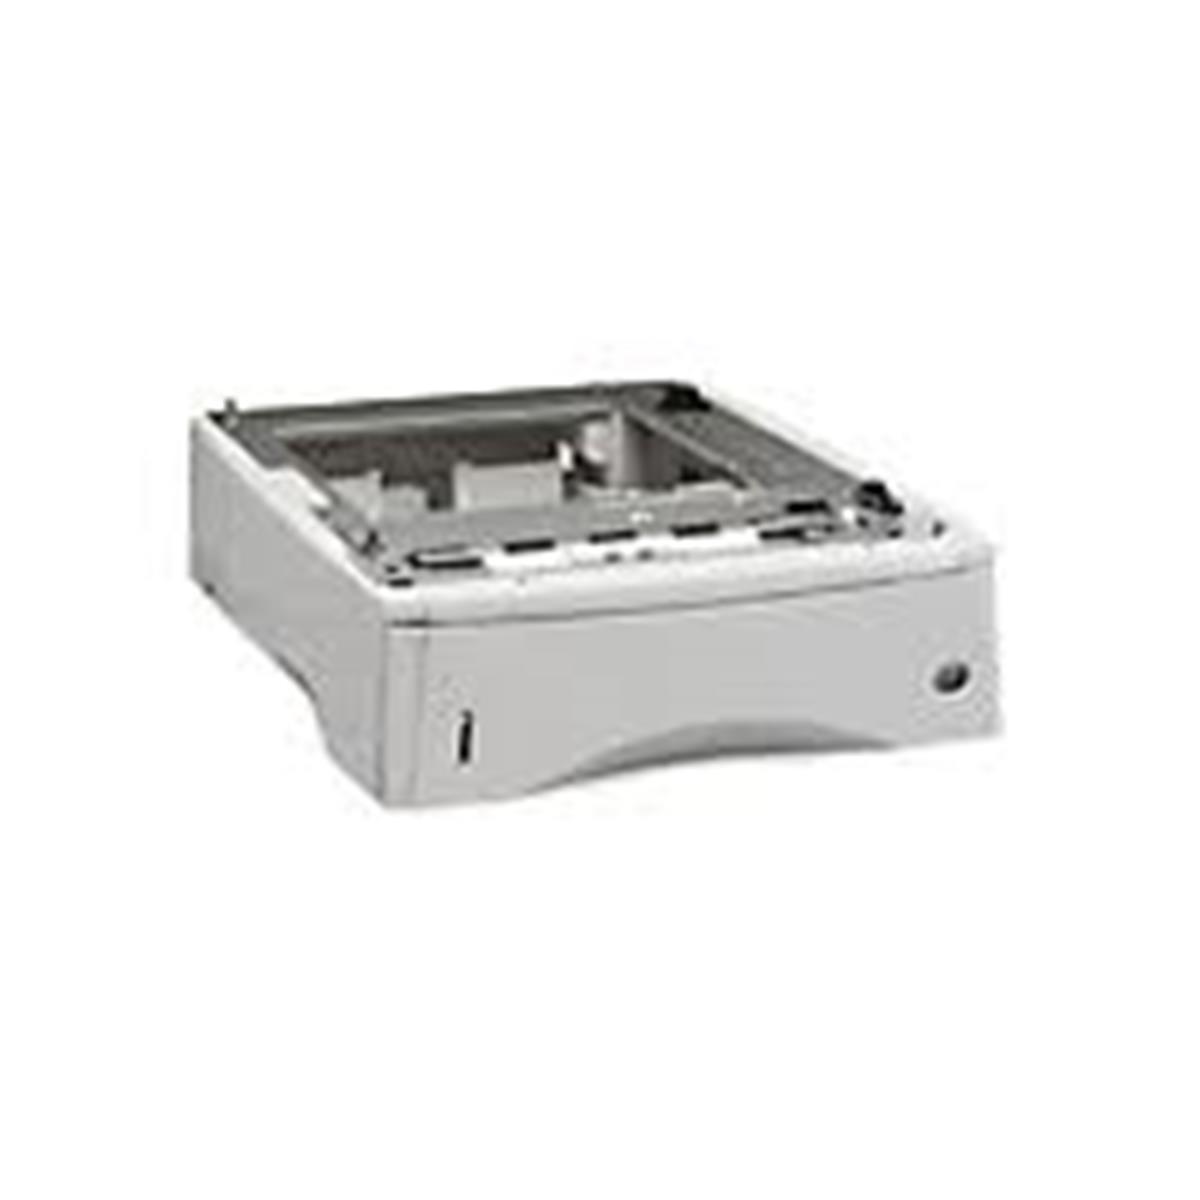 Rm1-6279-oem 500 Sheet Paper Input Tray 2 Cassette Assembly For P3015